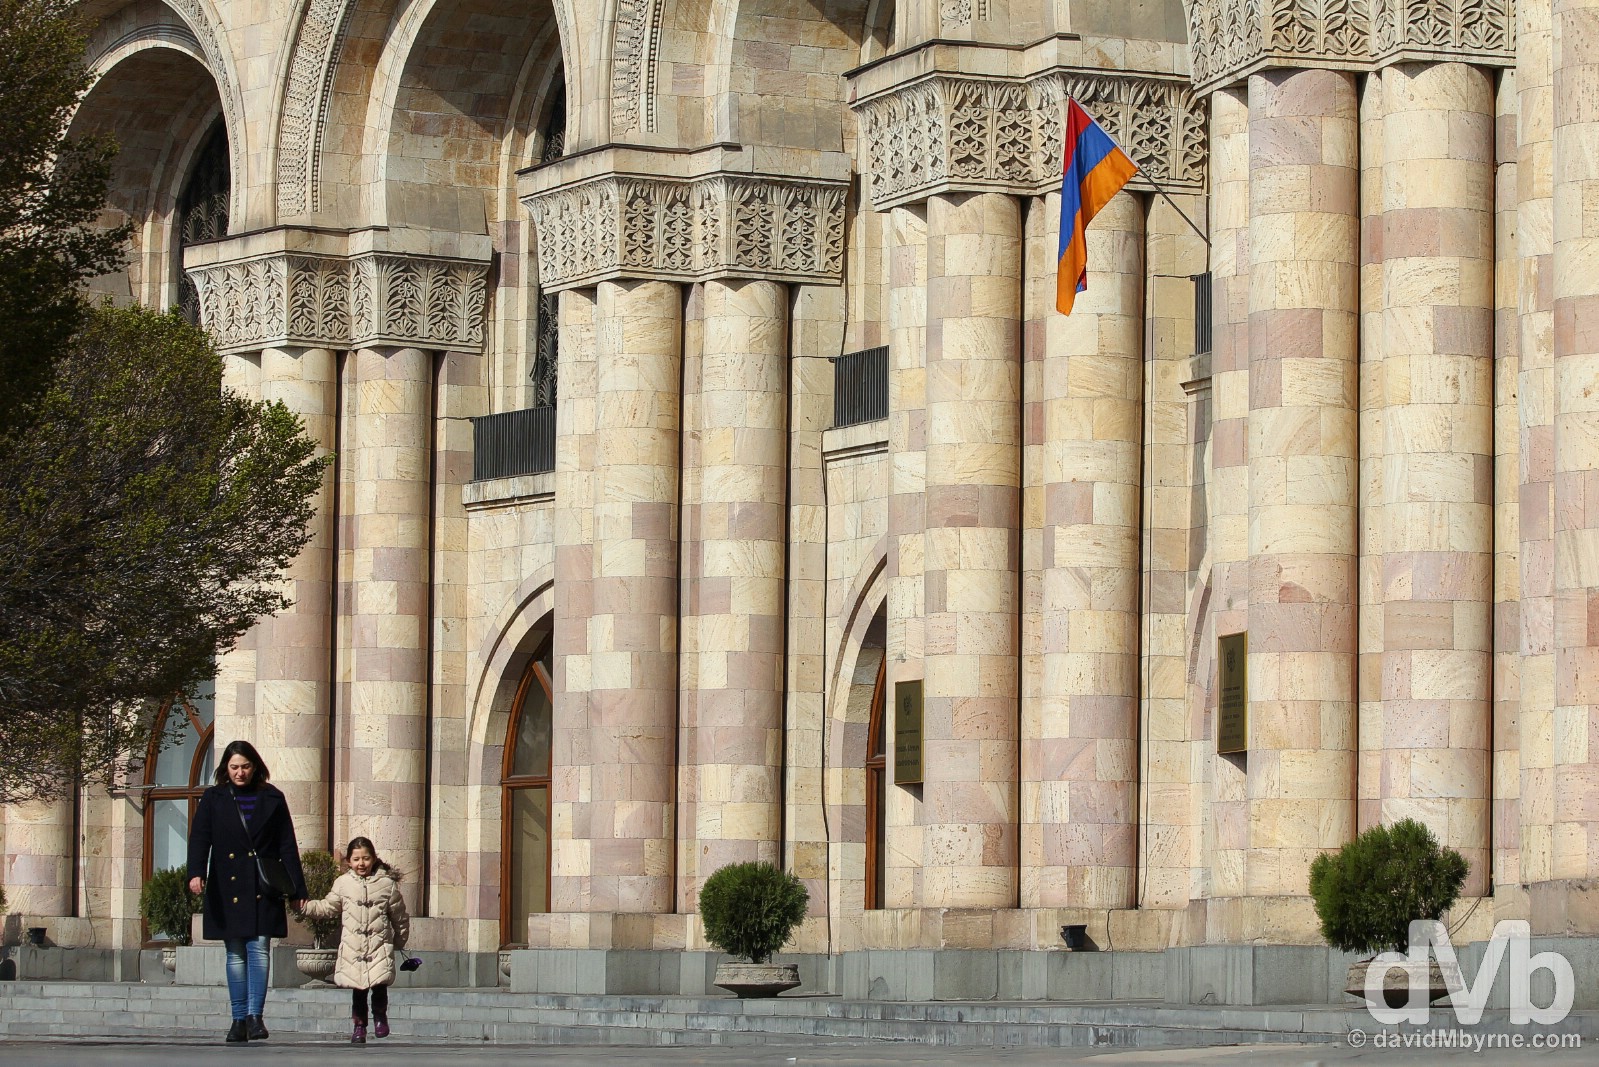 Outside the Ministry of Foreign Affairs in Hanrapetutyan Hraparak (Republic Square), Yerevan, Armenia. March 25, 2015.